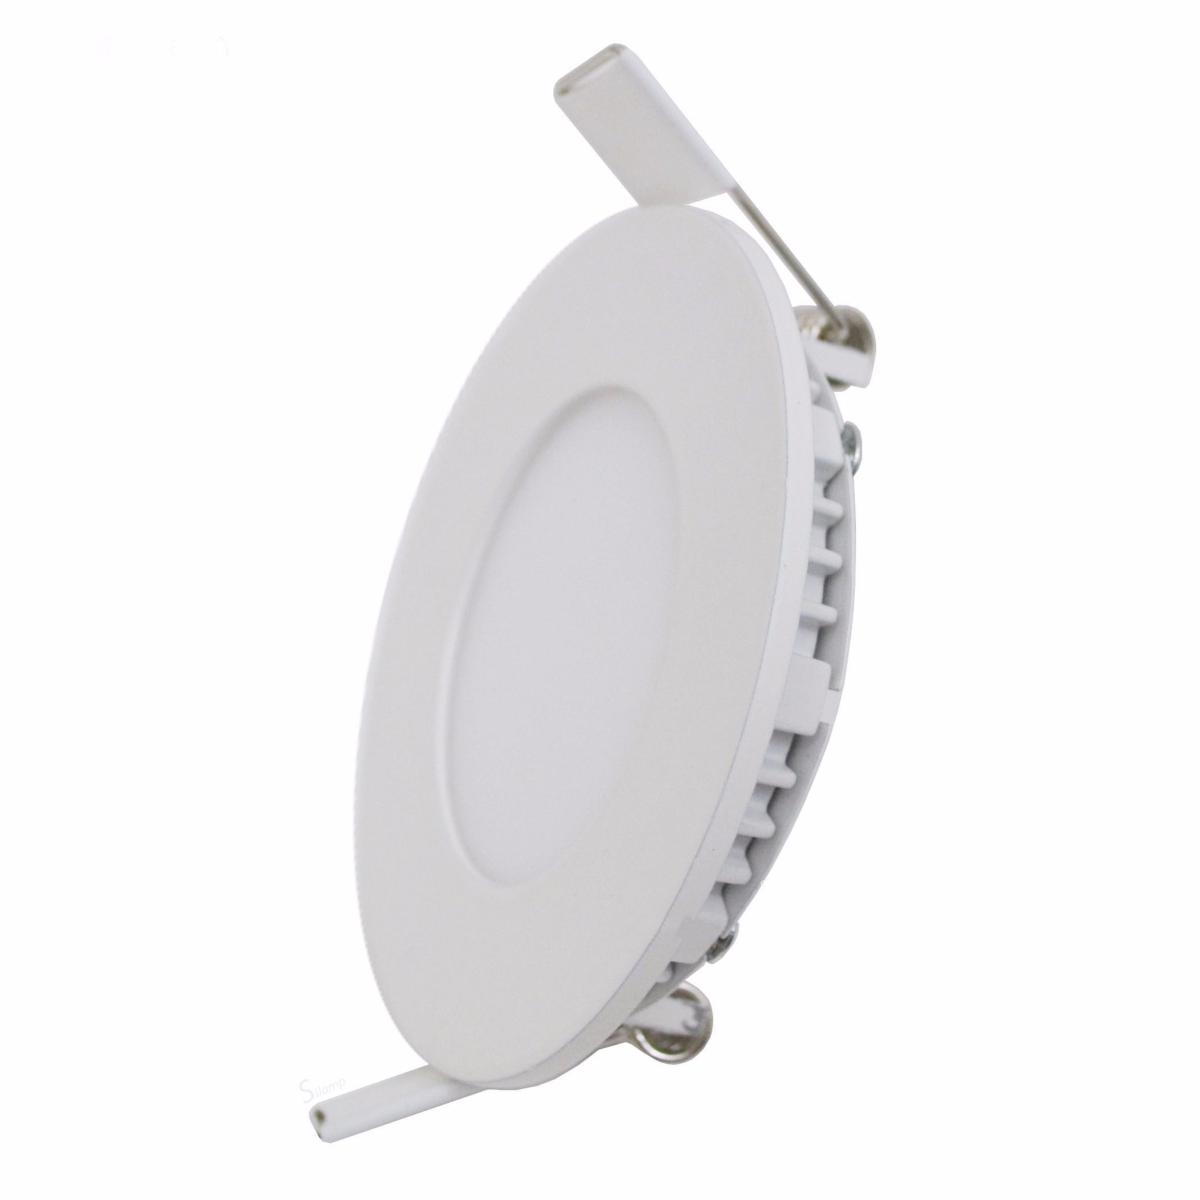 10 Spot Encastrable LED 6W Rond Extra-Plat - Blanc Froid 6000K